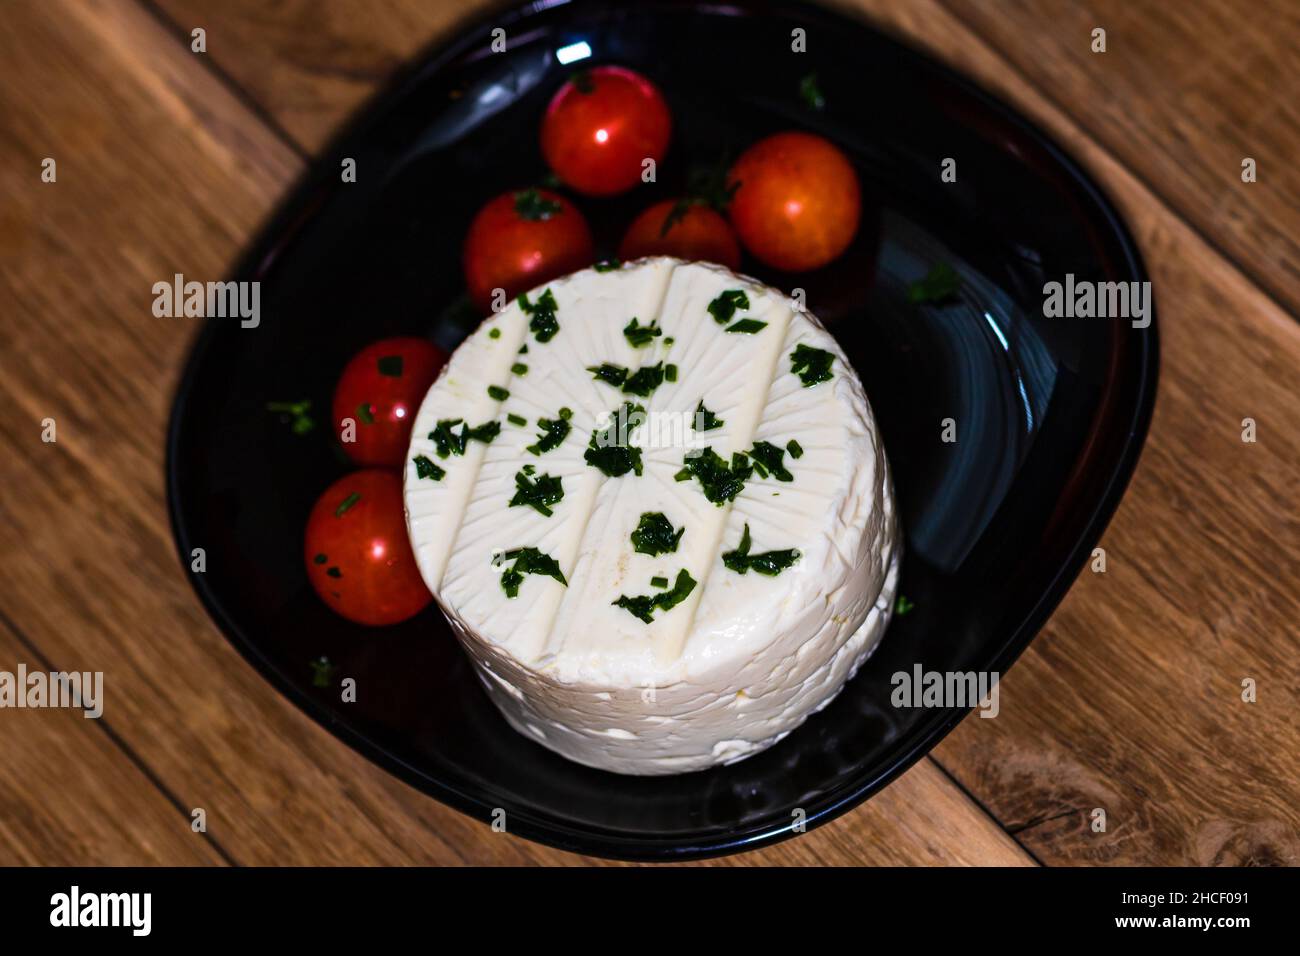 Tasty white cheese with spices and cherry tomatoes on cutting board Stock Photo